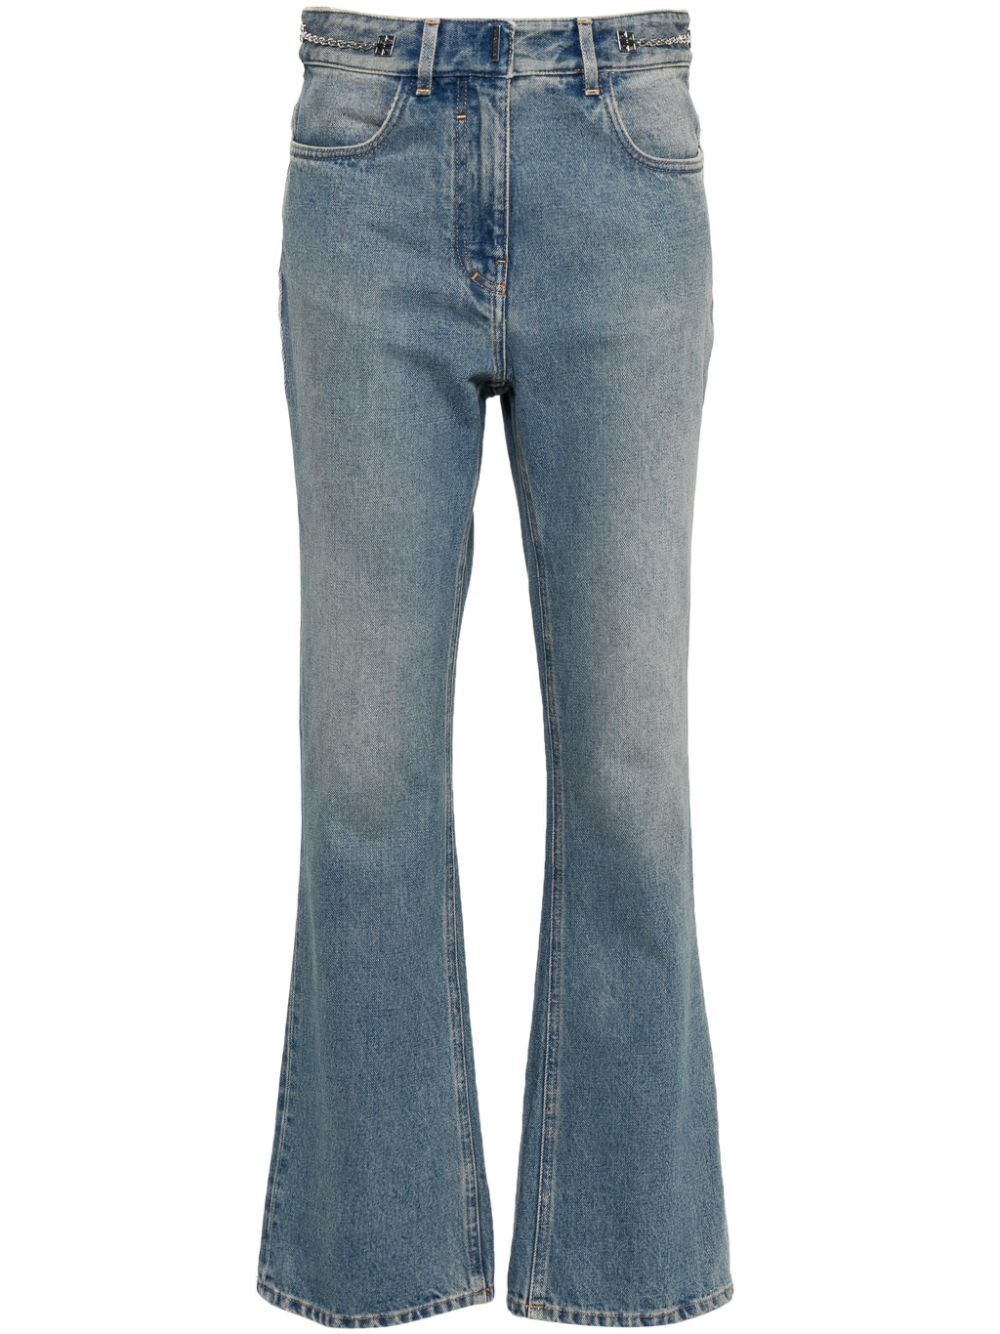 Bootcut jeans with chain details